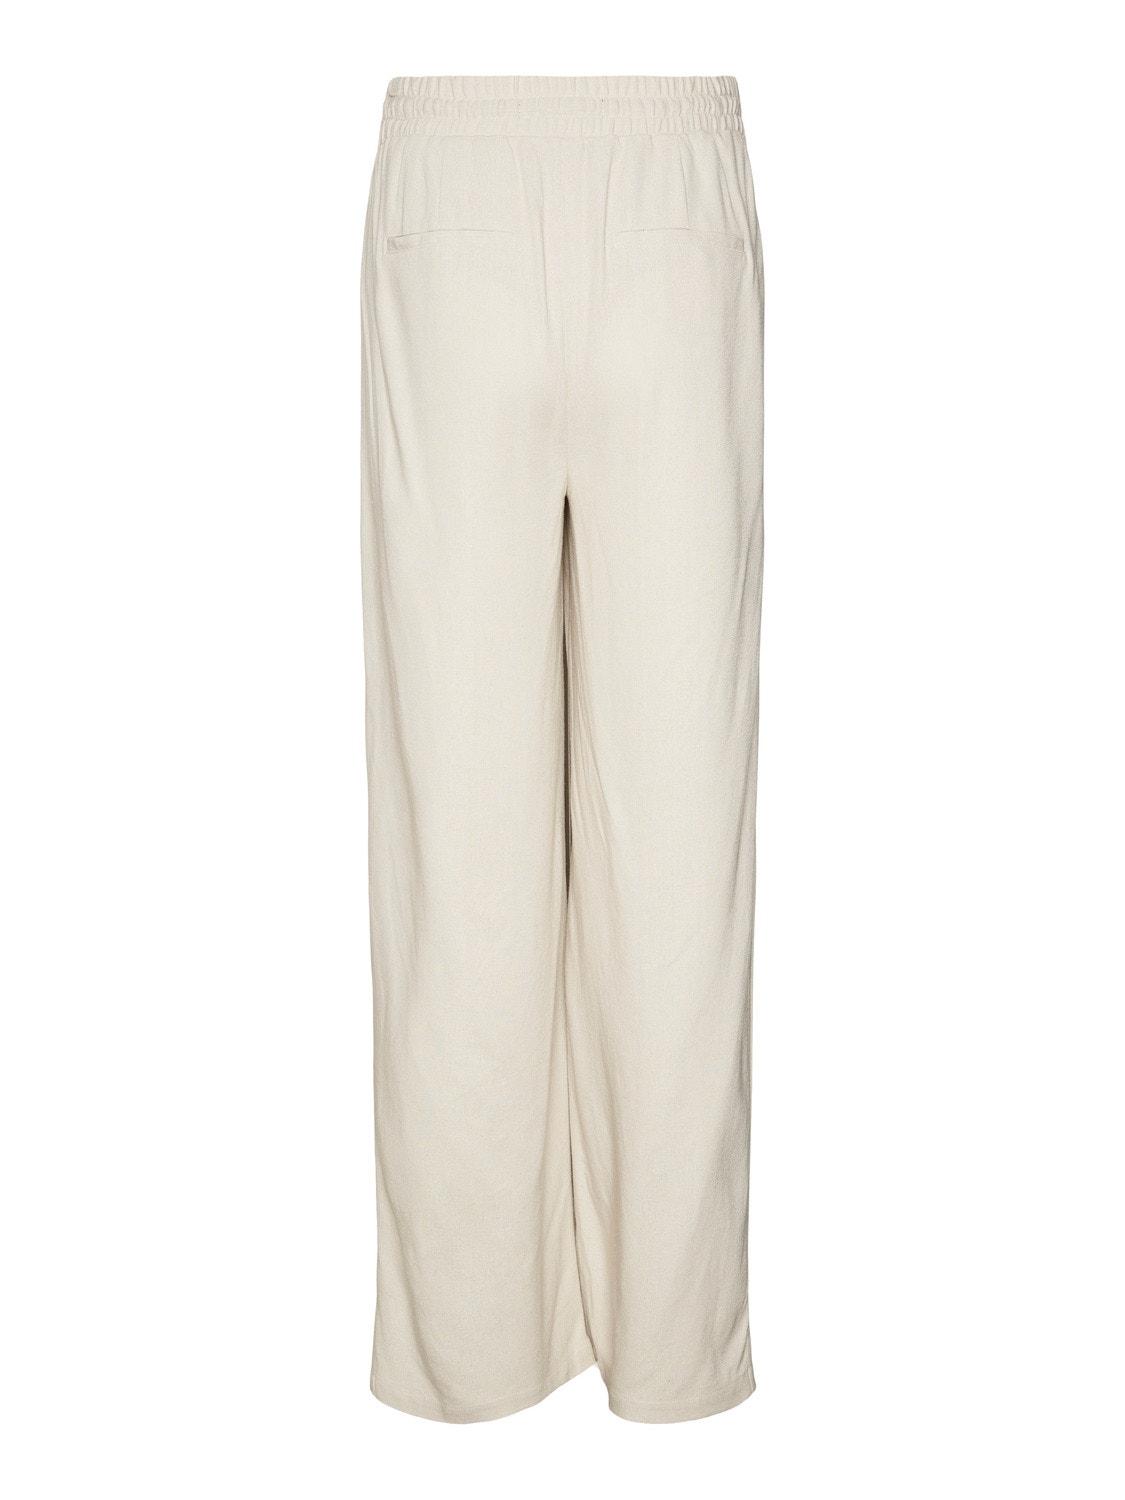 MAMA.LICIOUS Regular Fit Trousers -Silver Lining - 20020488